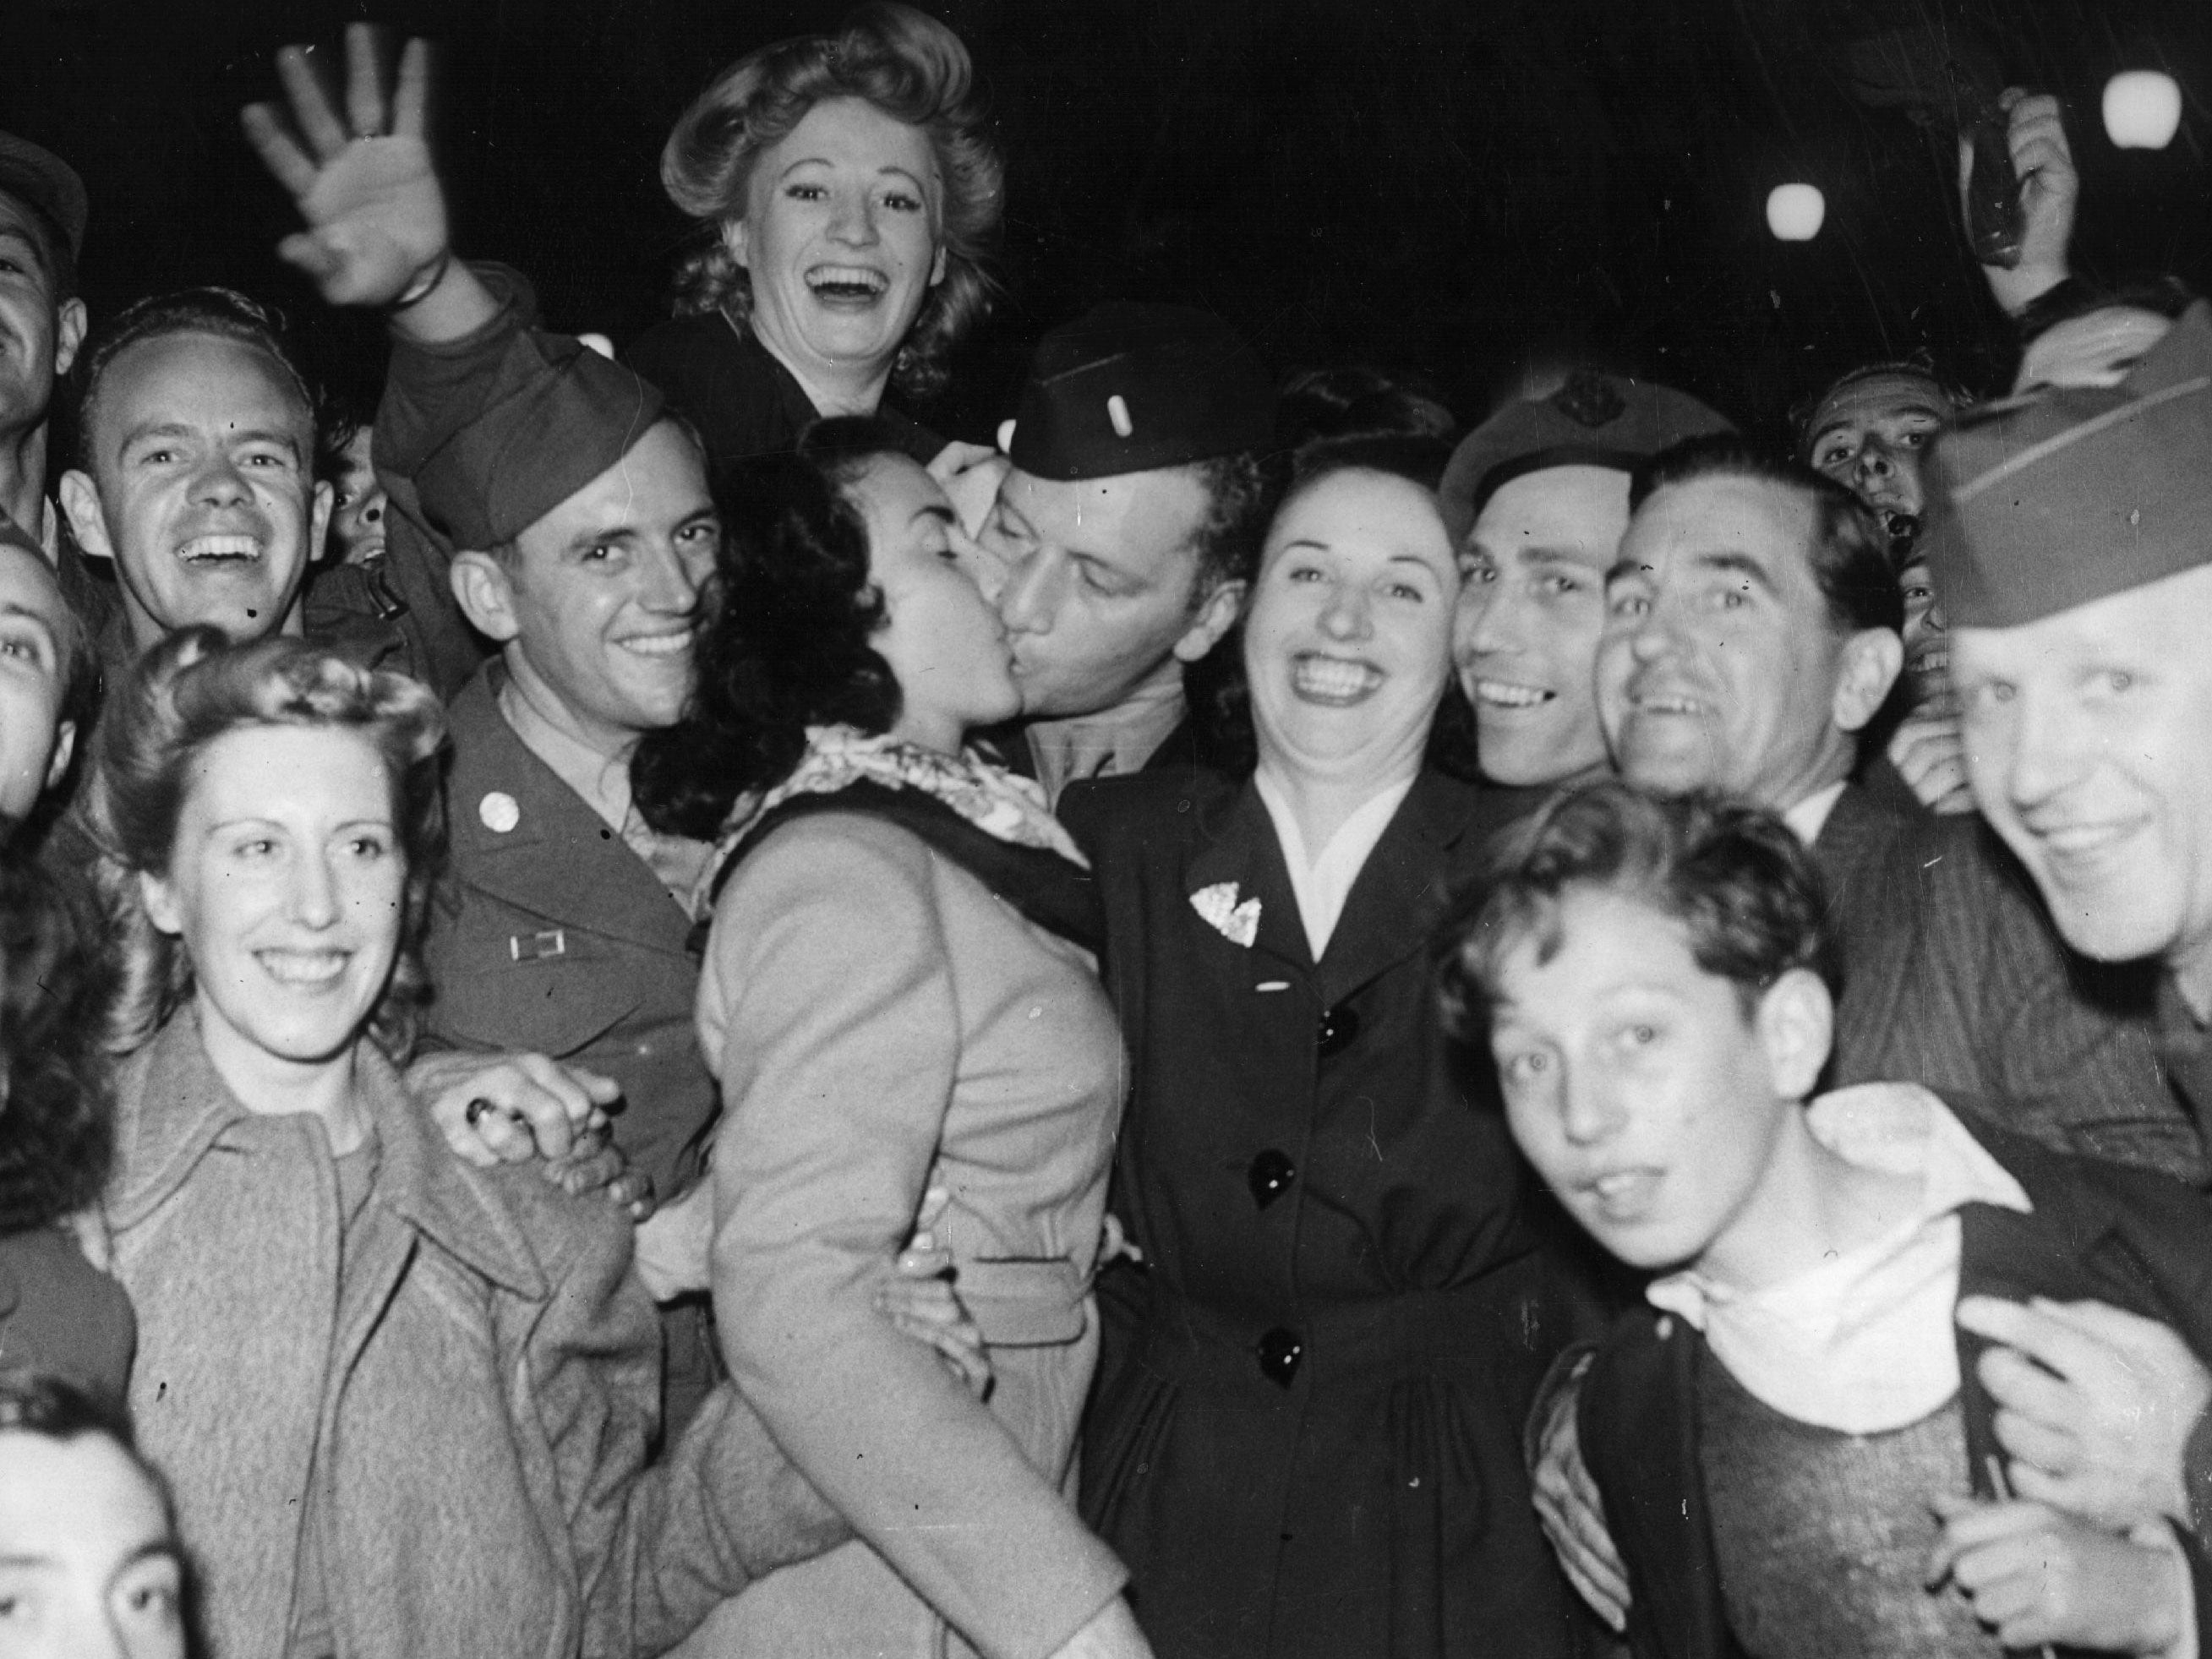 Londoners partied in Piccadilly Circus on VJ Day in 1945